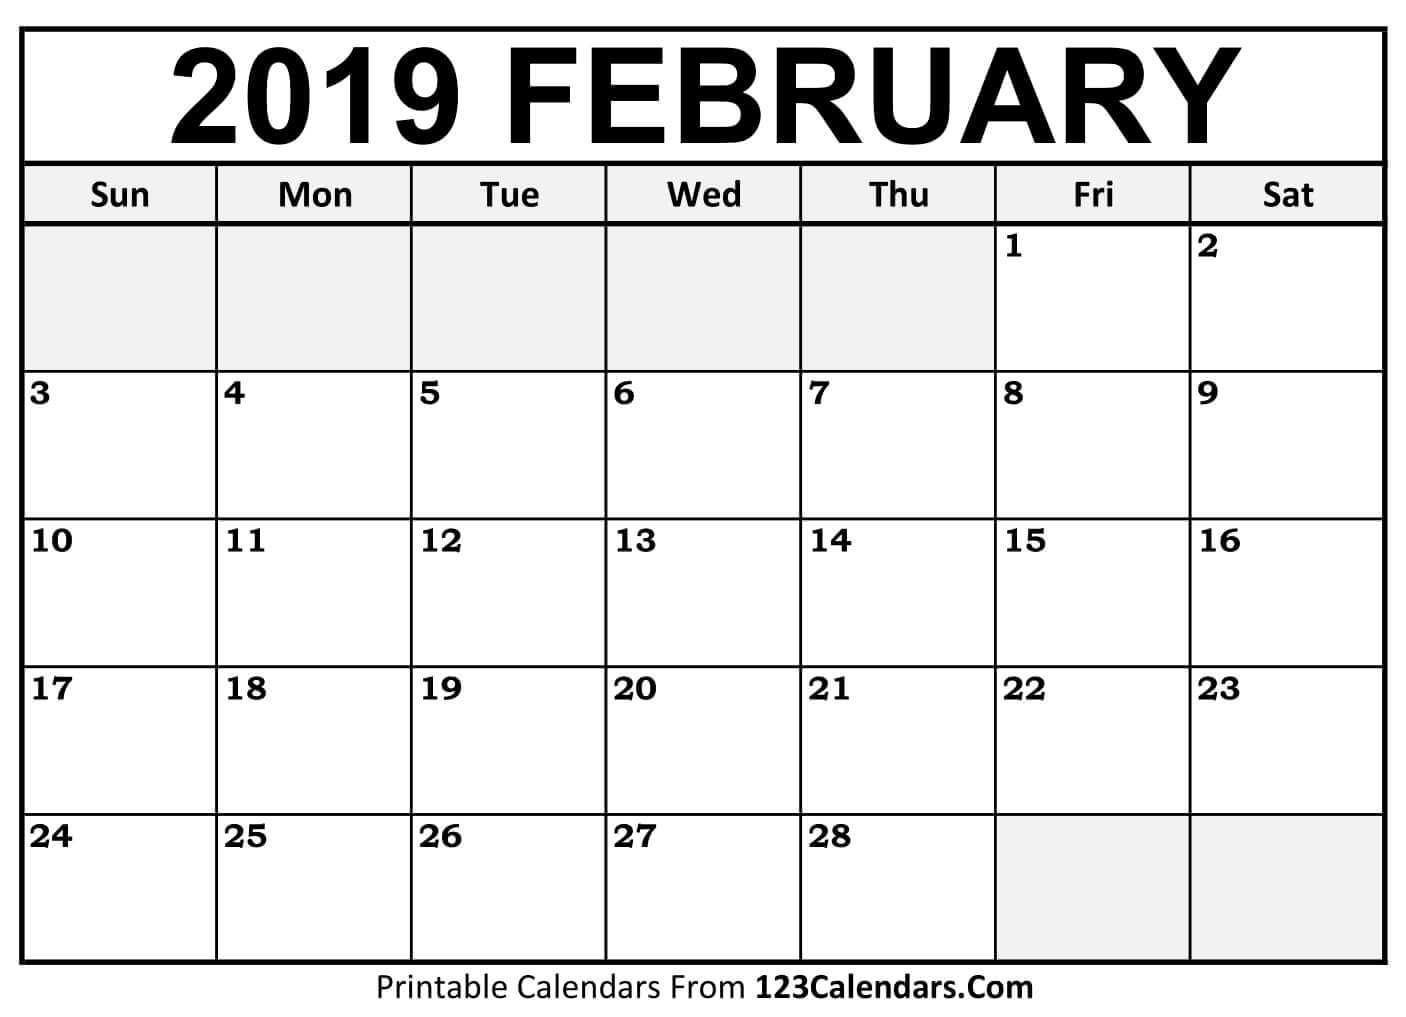 february clipart high resolution